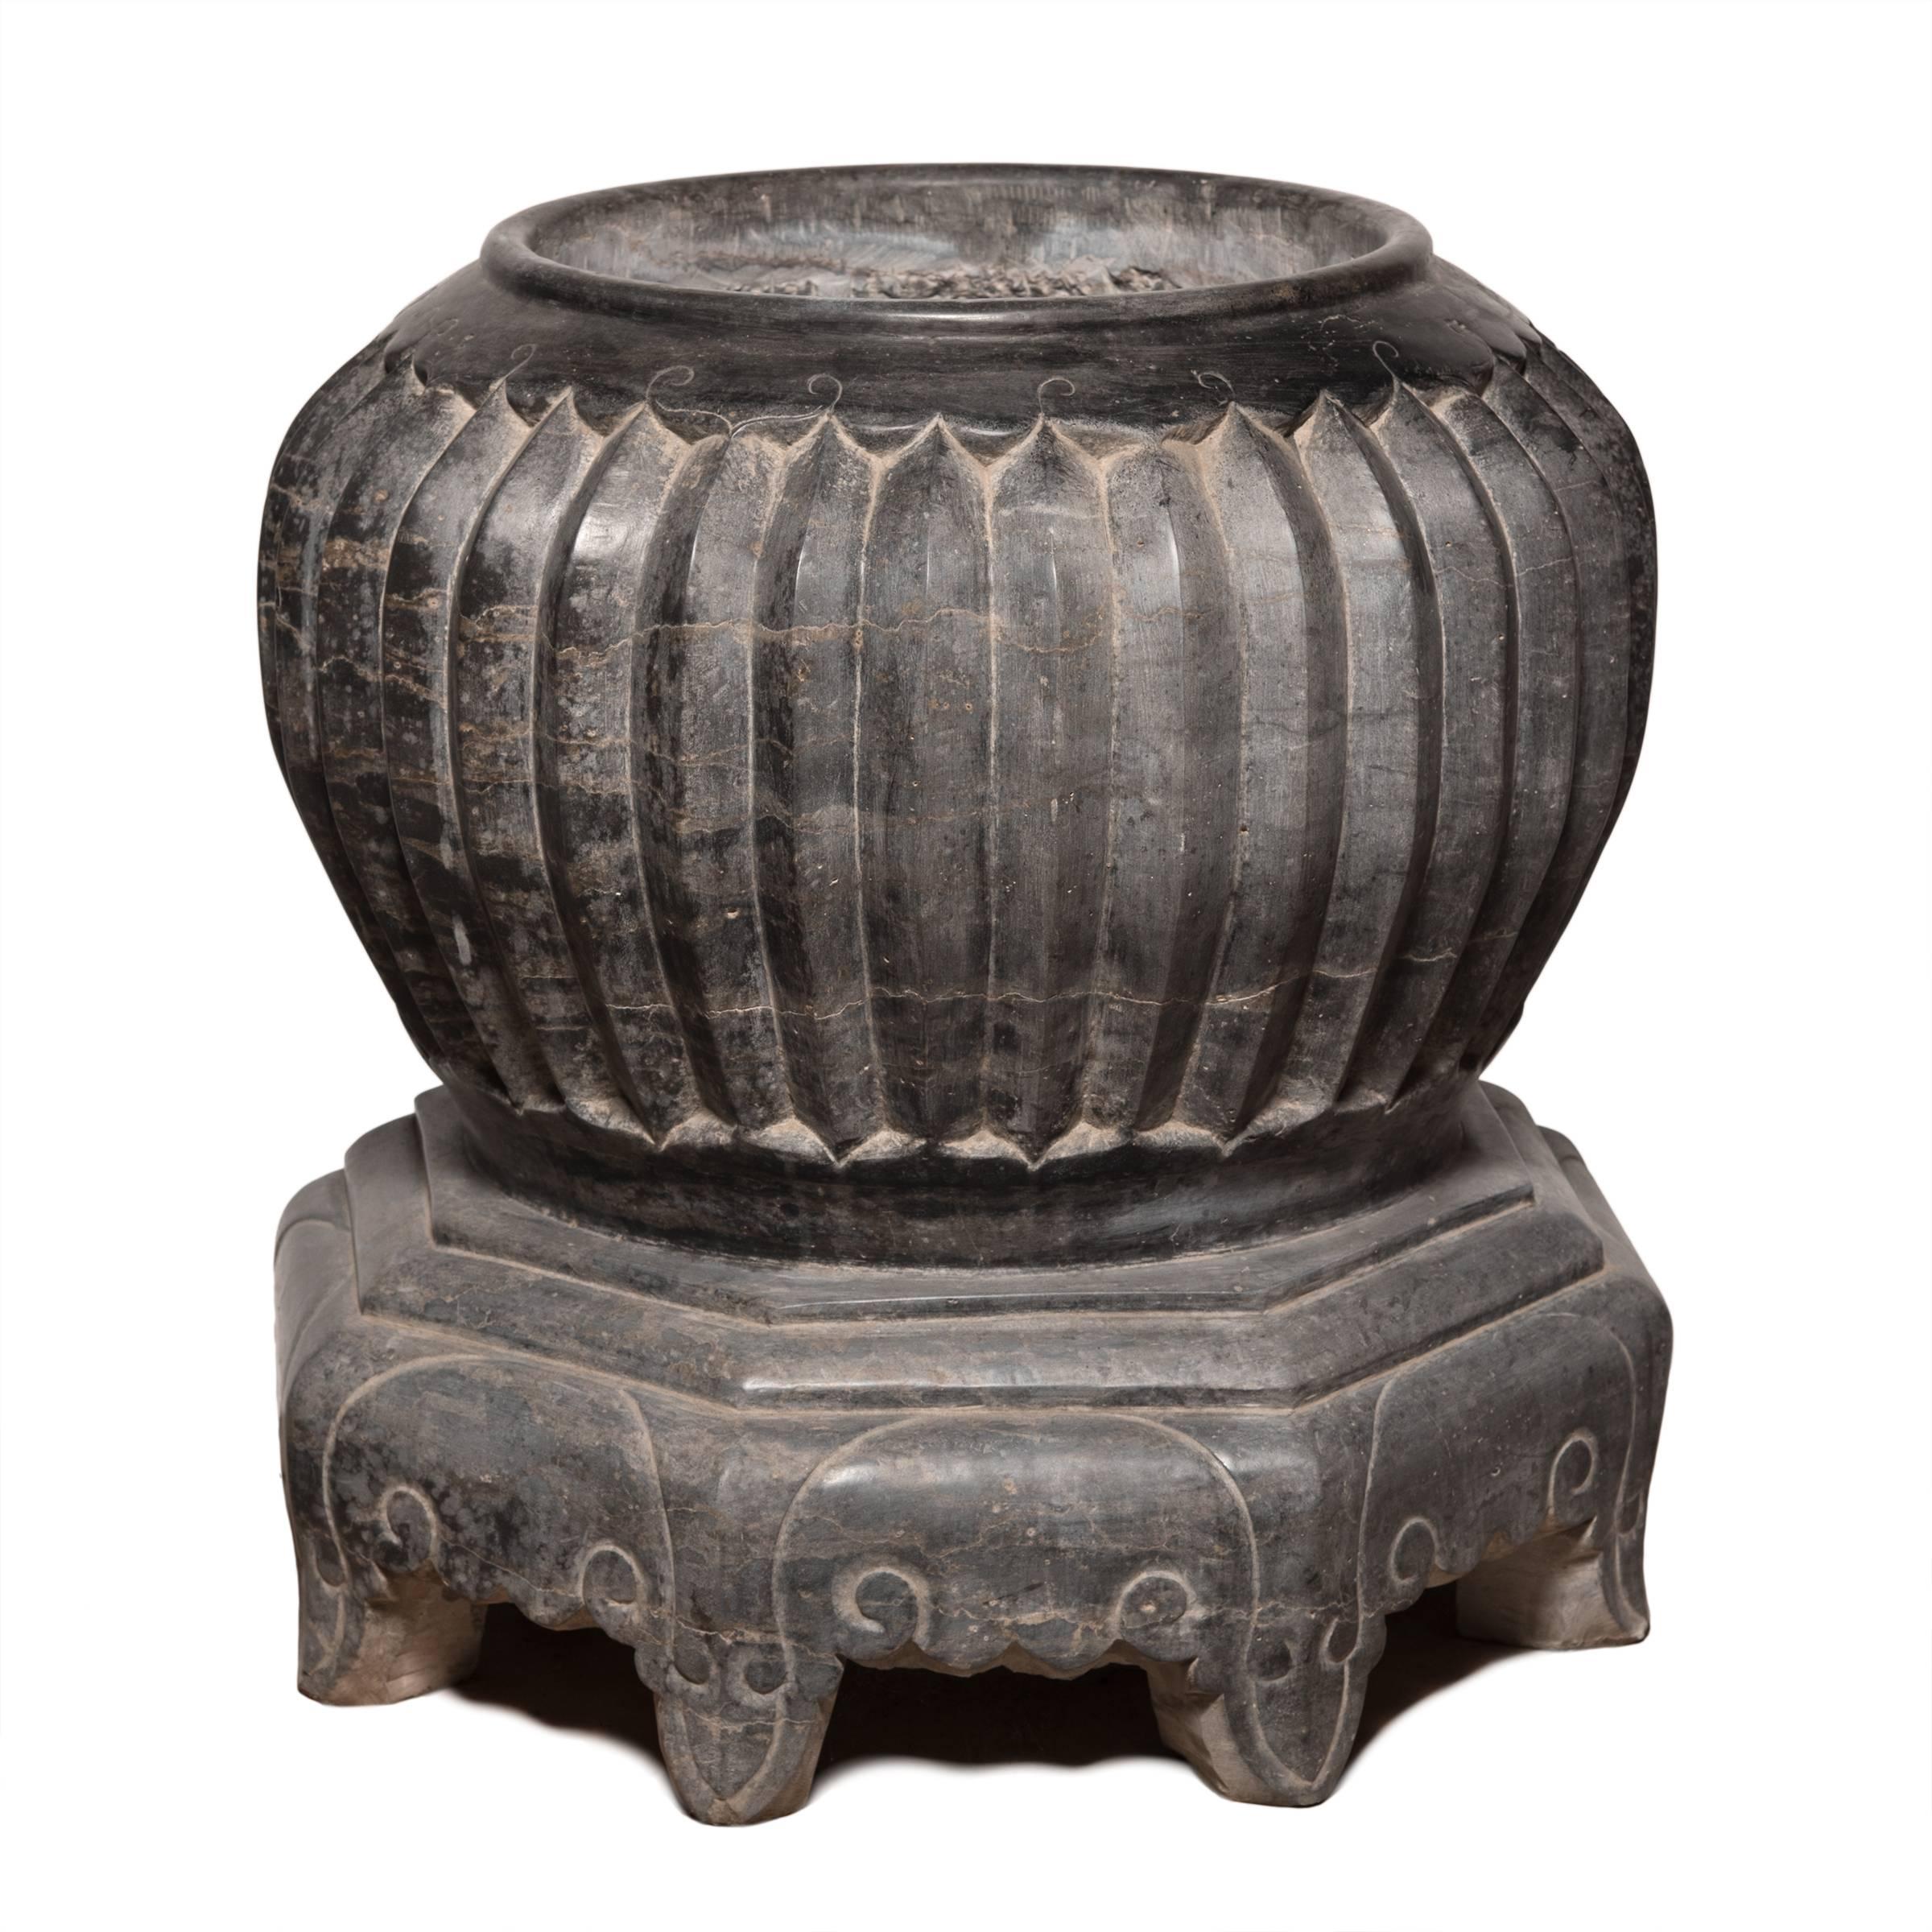 Hand-Carved Chinese Footed Melon Basin Planter